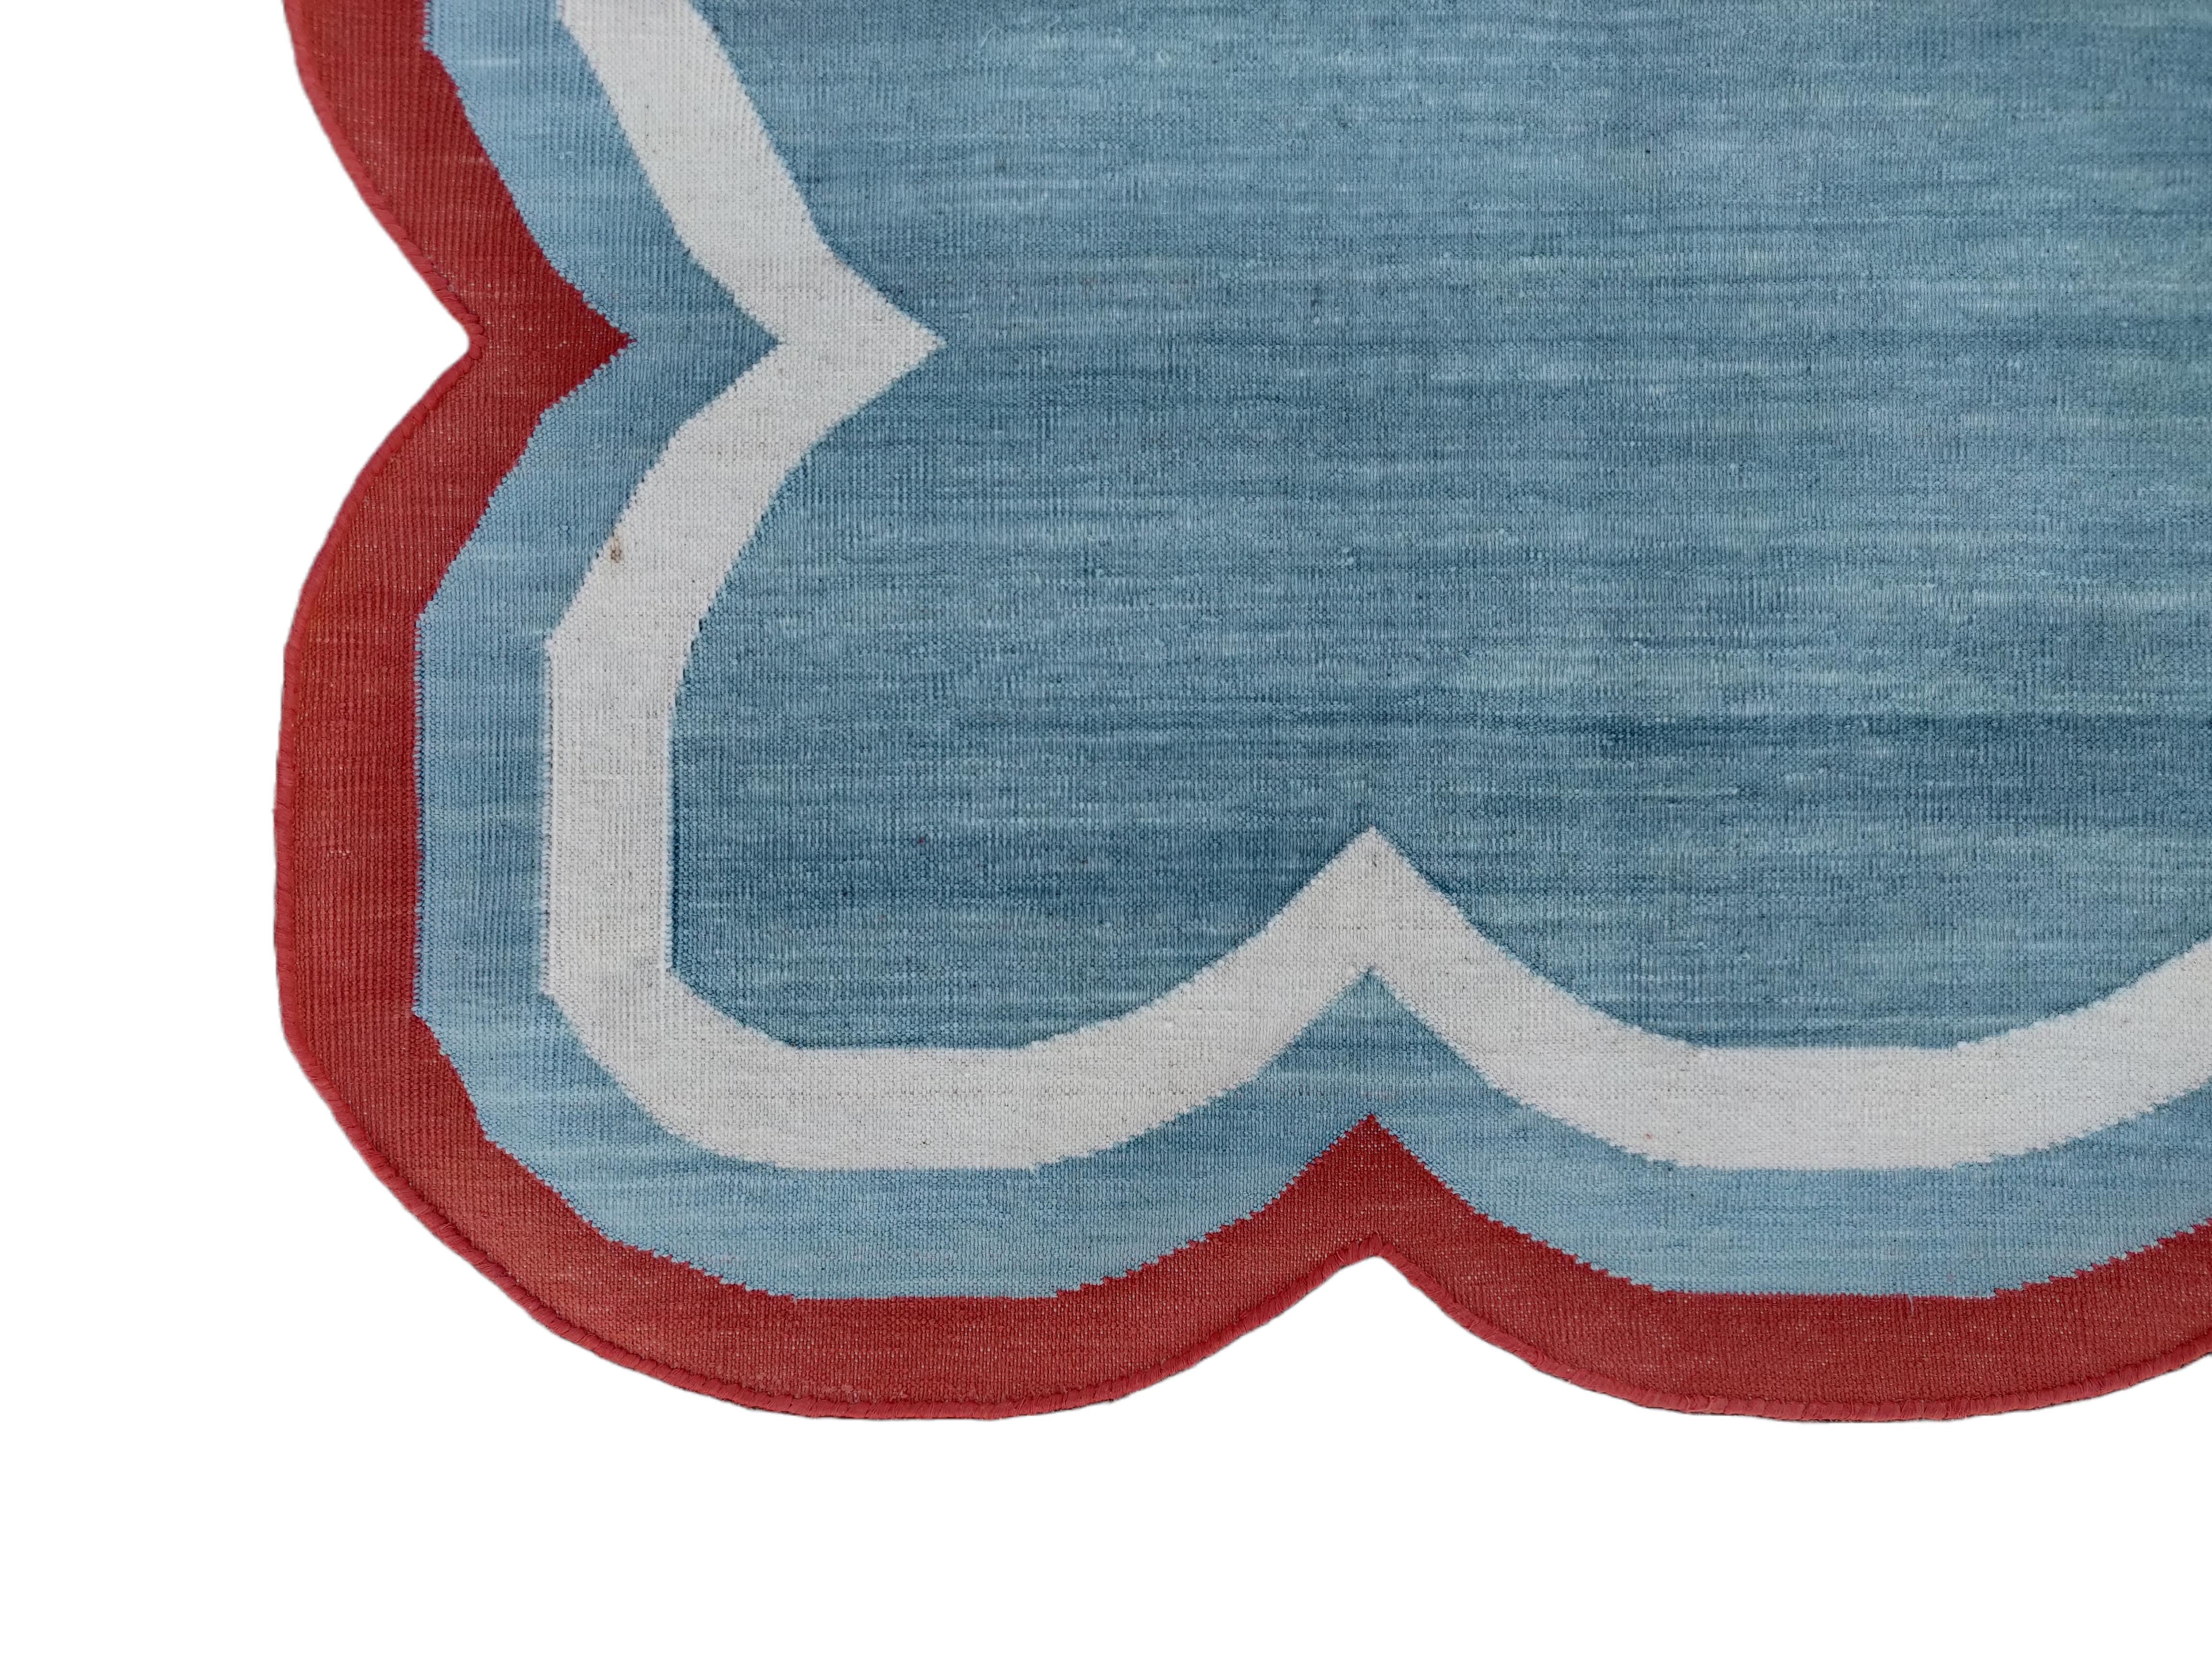 Contemporary Handmade Cotton Area Flat Weave Rug, 5x8 Blue And Red Scalloped Kilim Dhurrie For Sale